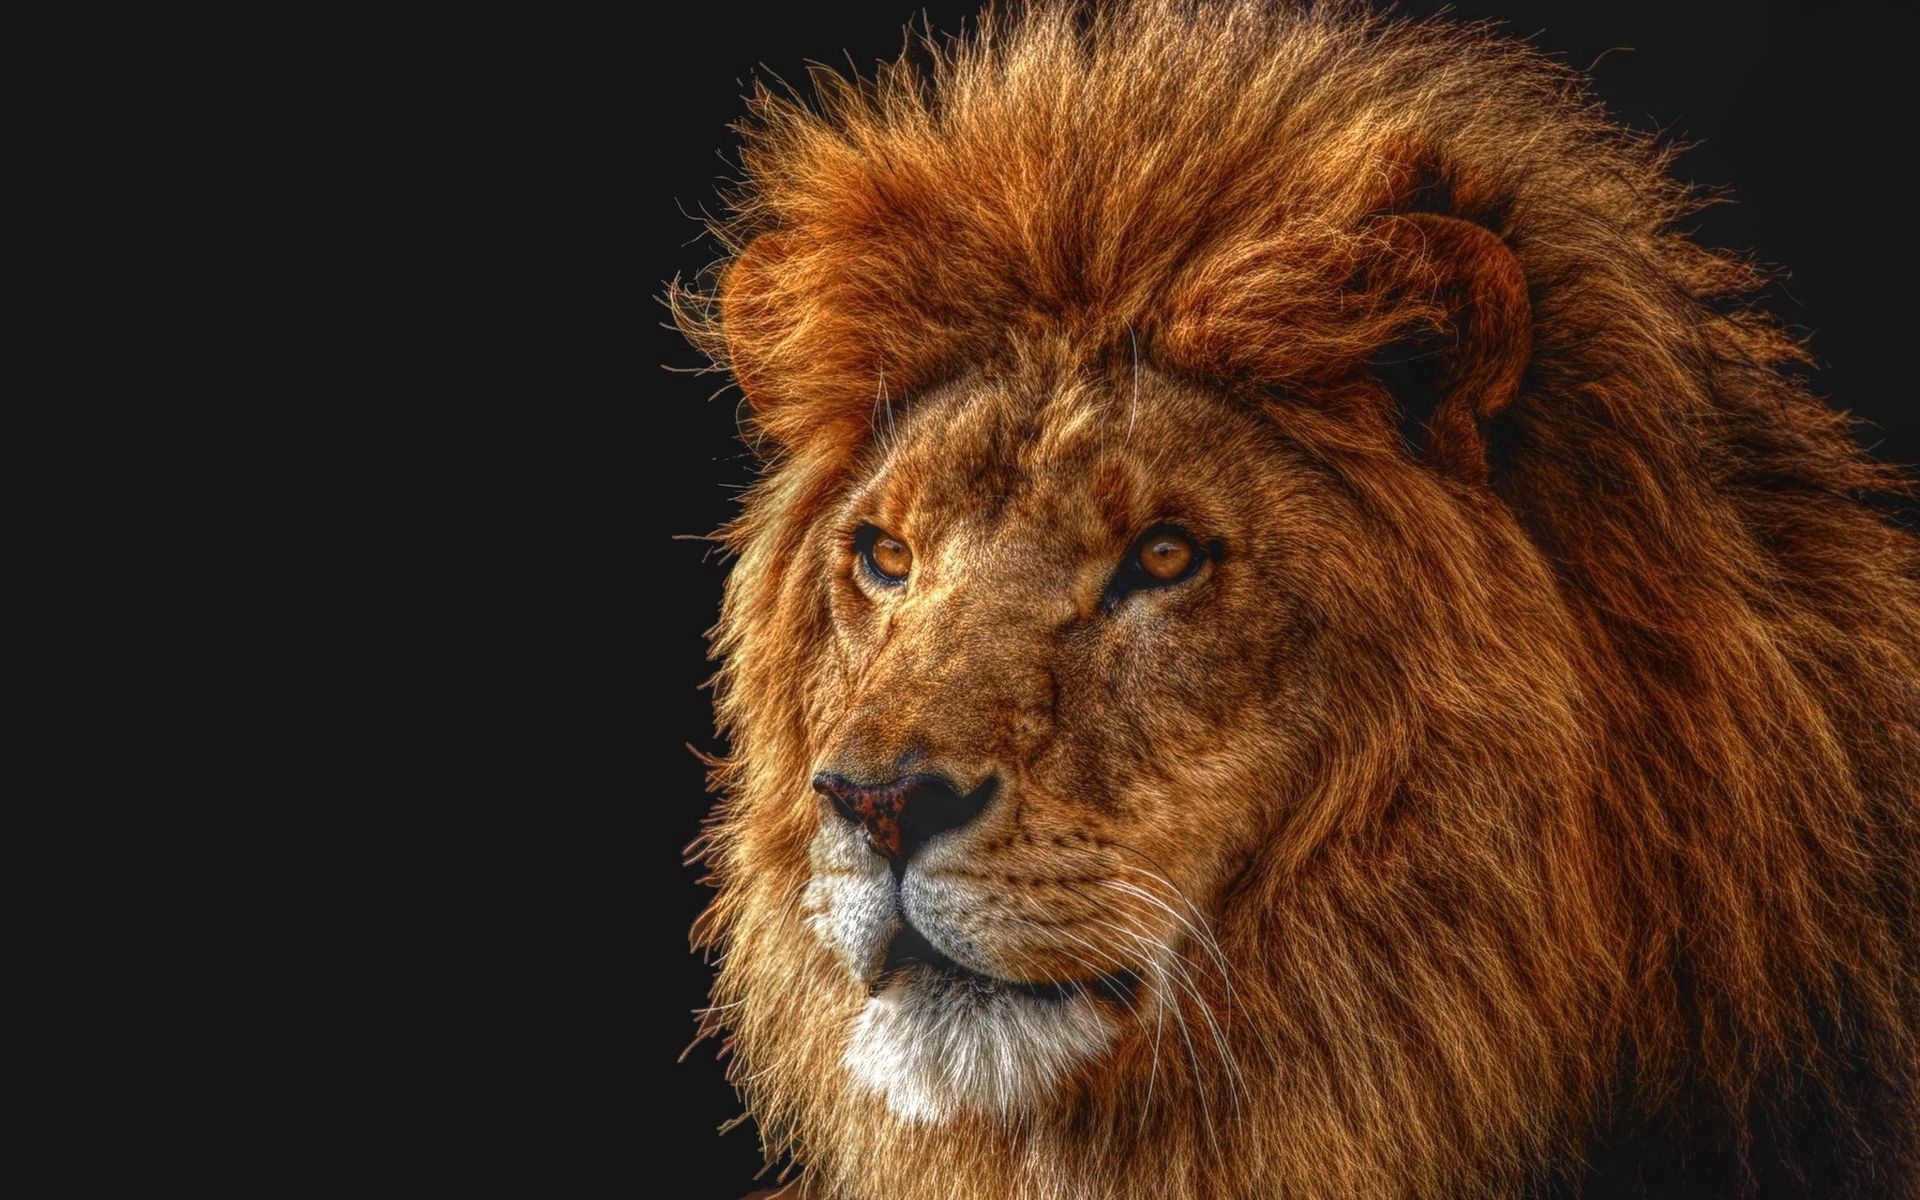 sight, king of beasts, king of the beasts, animals, shadow, lion, predator, opinion, mane